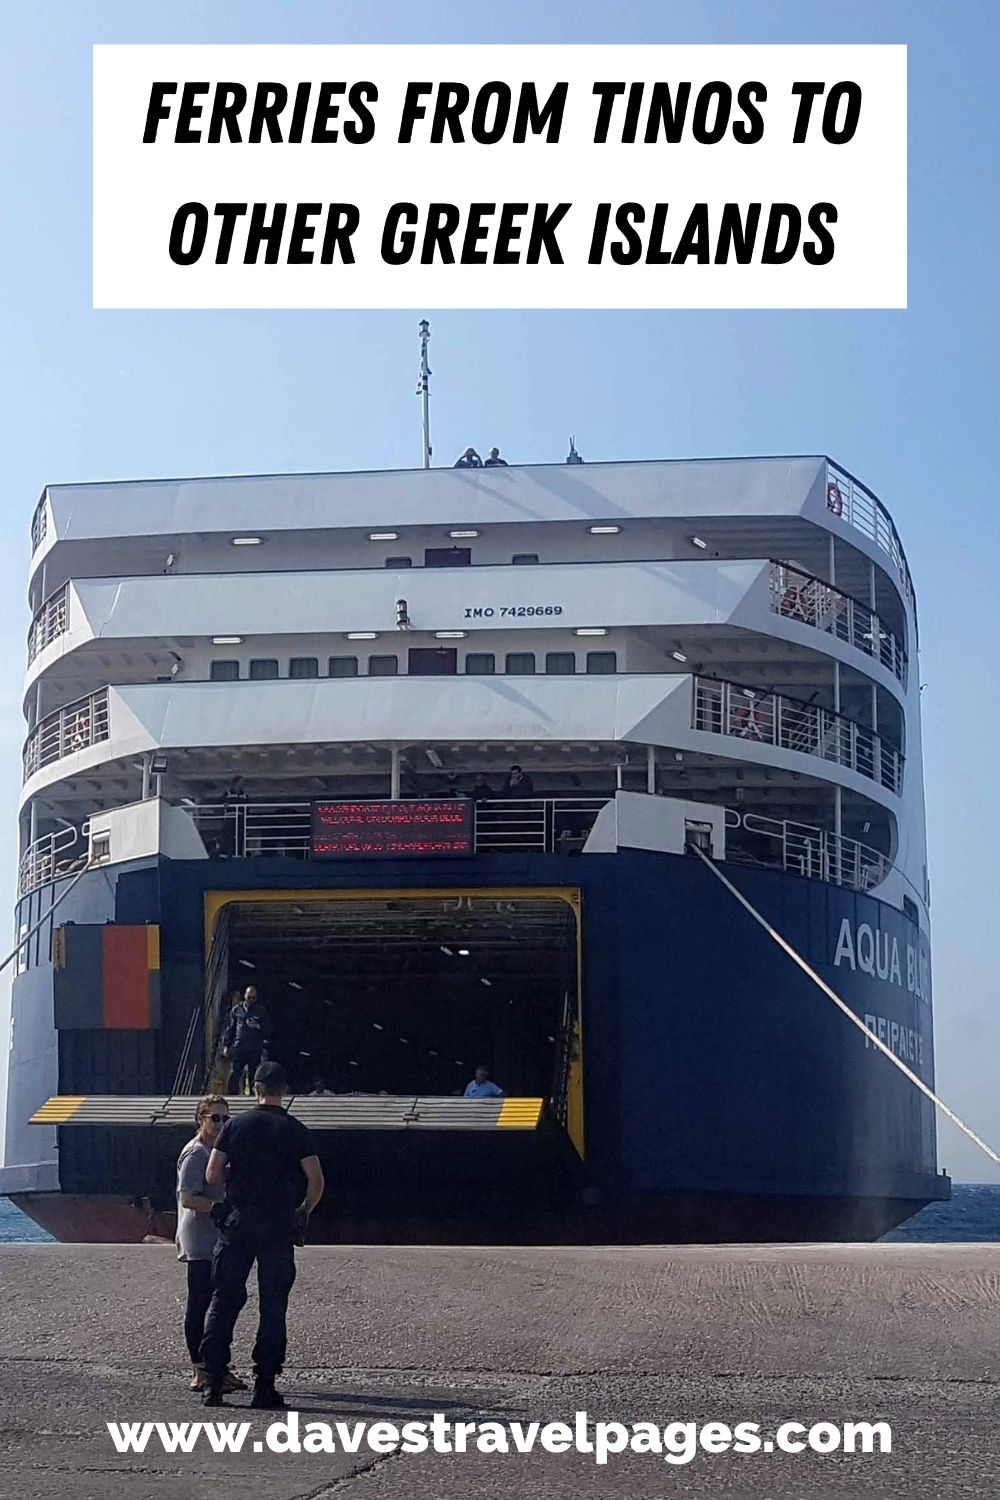 Taking ferries from Tinos to other Greek islands